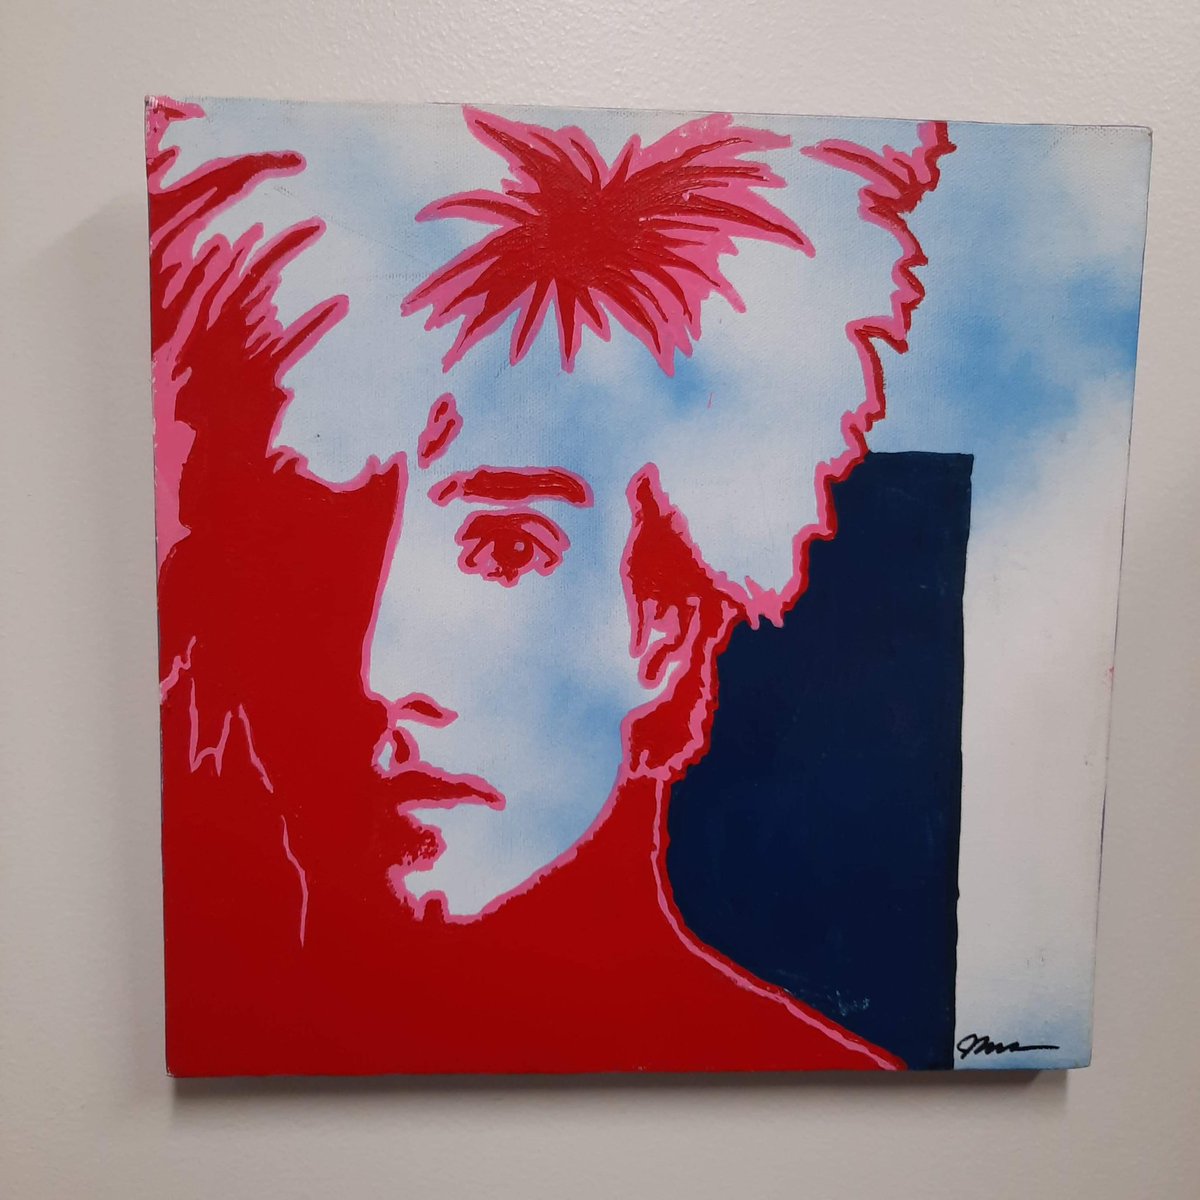 Are you a Warhol fan? I did this painting several years ago. I’m a huge pop art fan and he was one of my first inspirations! jefflassiterpopcult.etsy.com/listing/163918… #warhol #andywarhol #popart